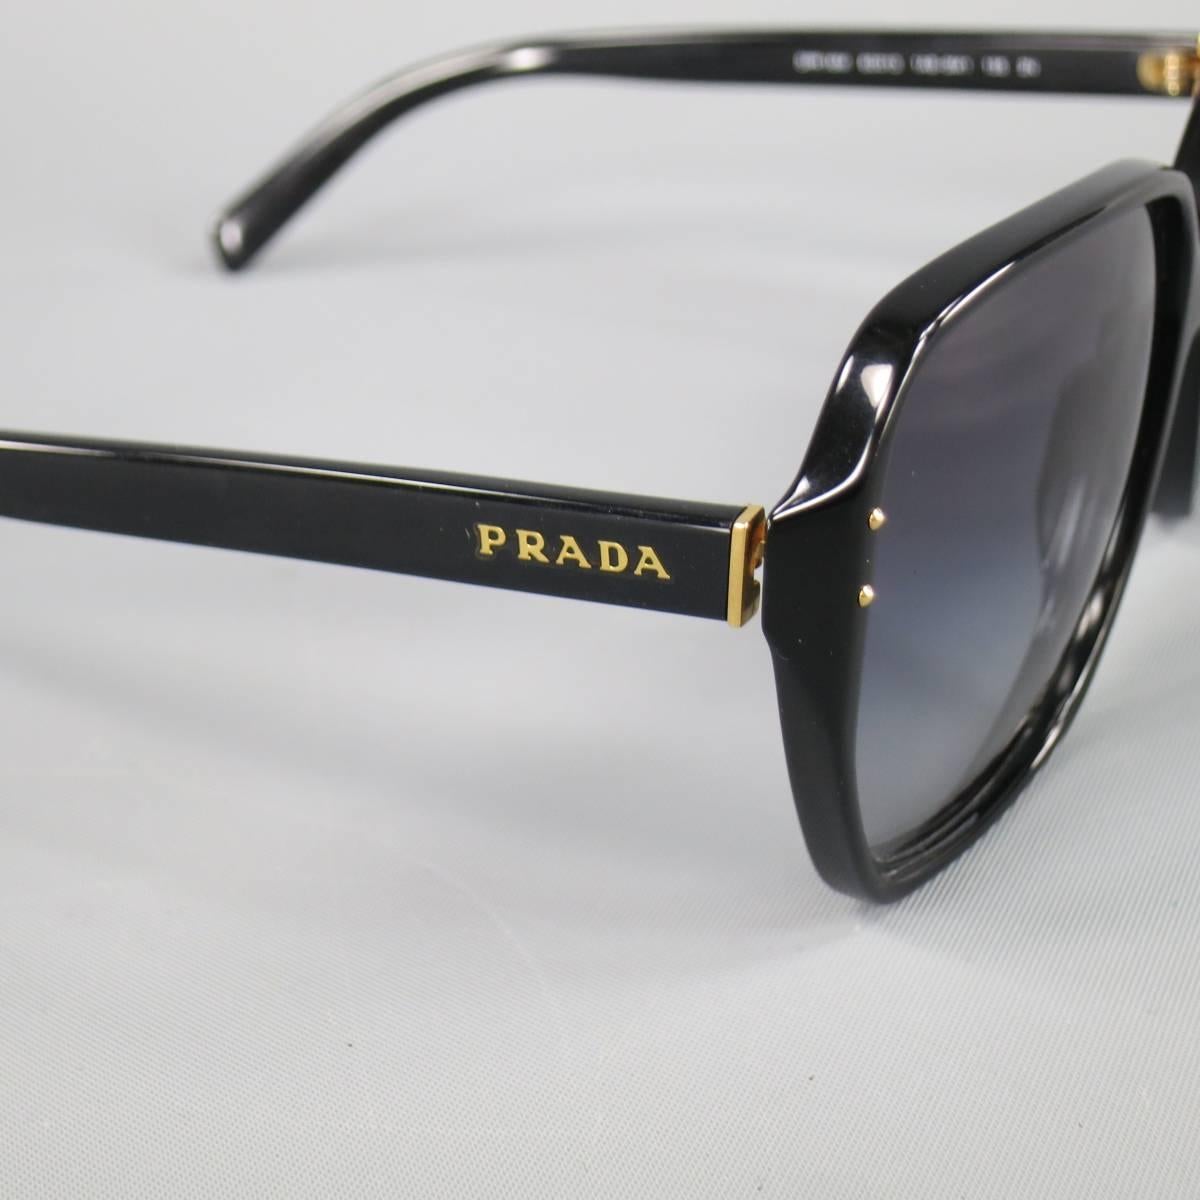 PRADA Sunglasses consists of acetate material in a black color tone. Designed in a oversize square frame, slim temples with 